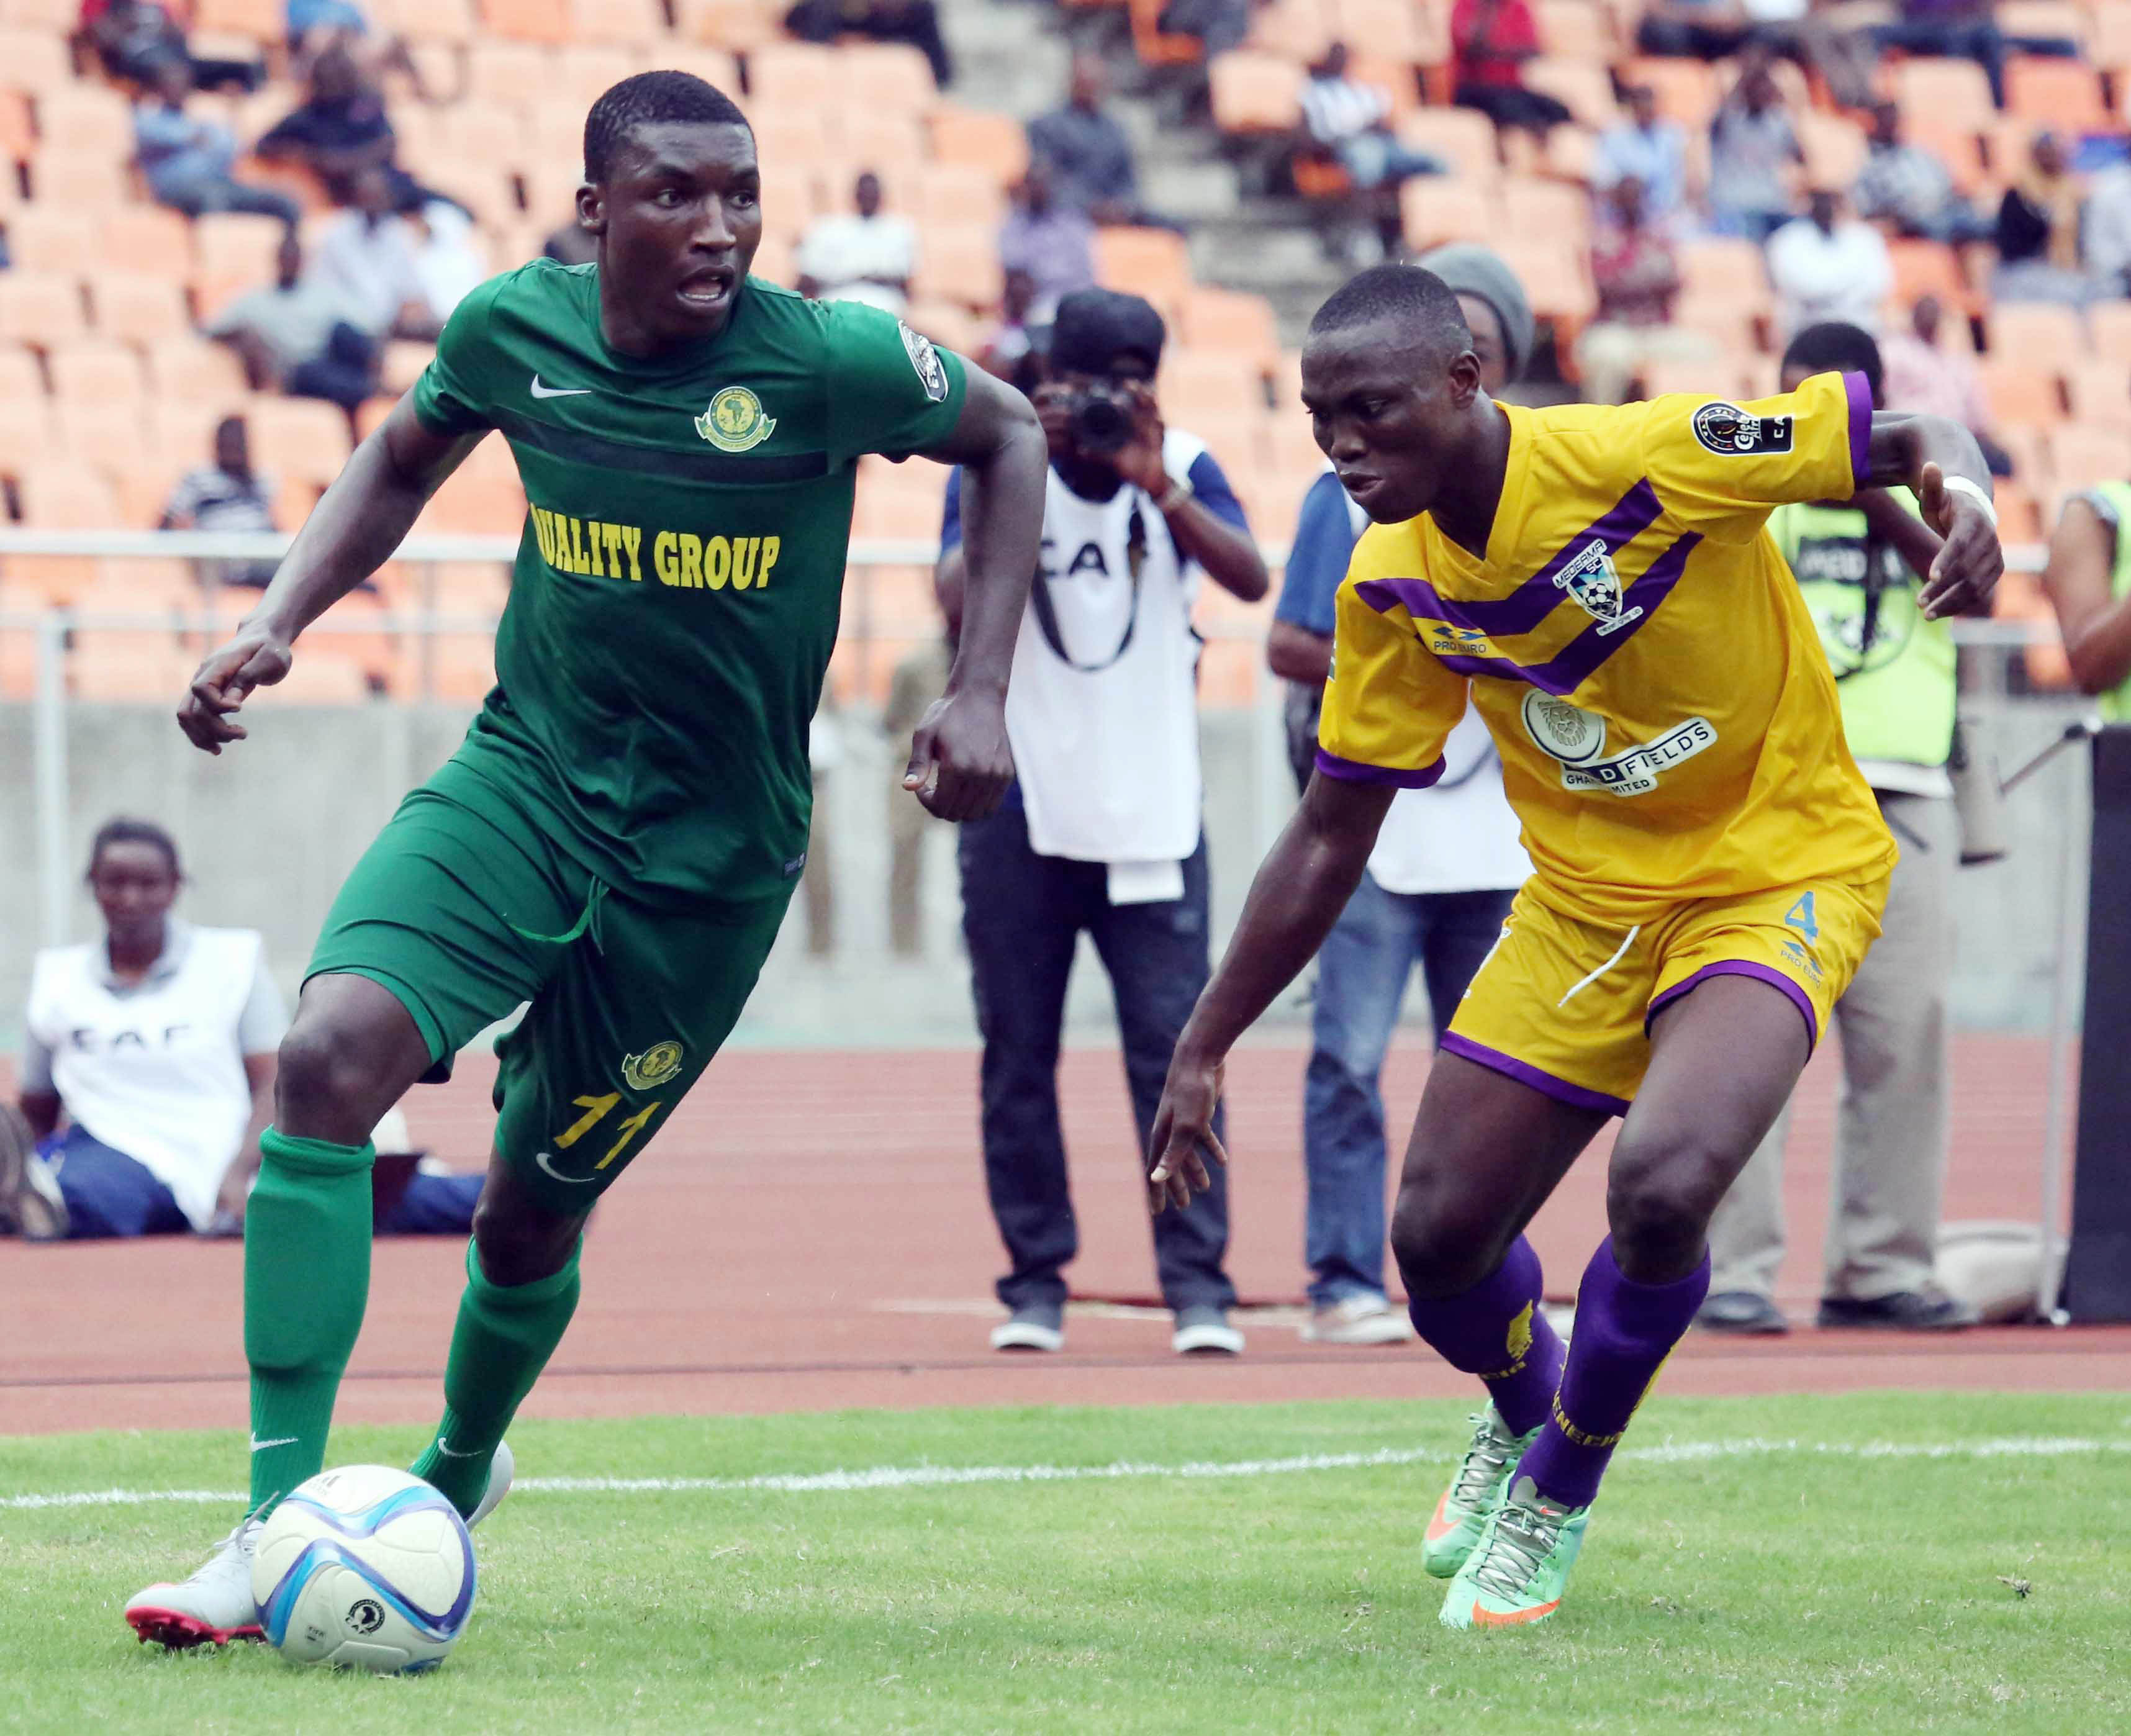 VIDEO: Watch Medeama's 1-1 draw at Young Africans in Confederation Cup